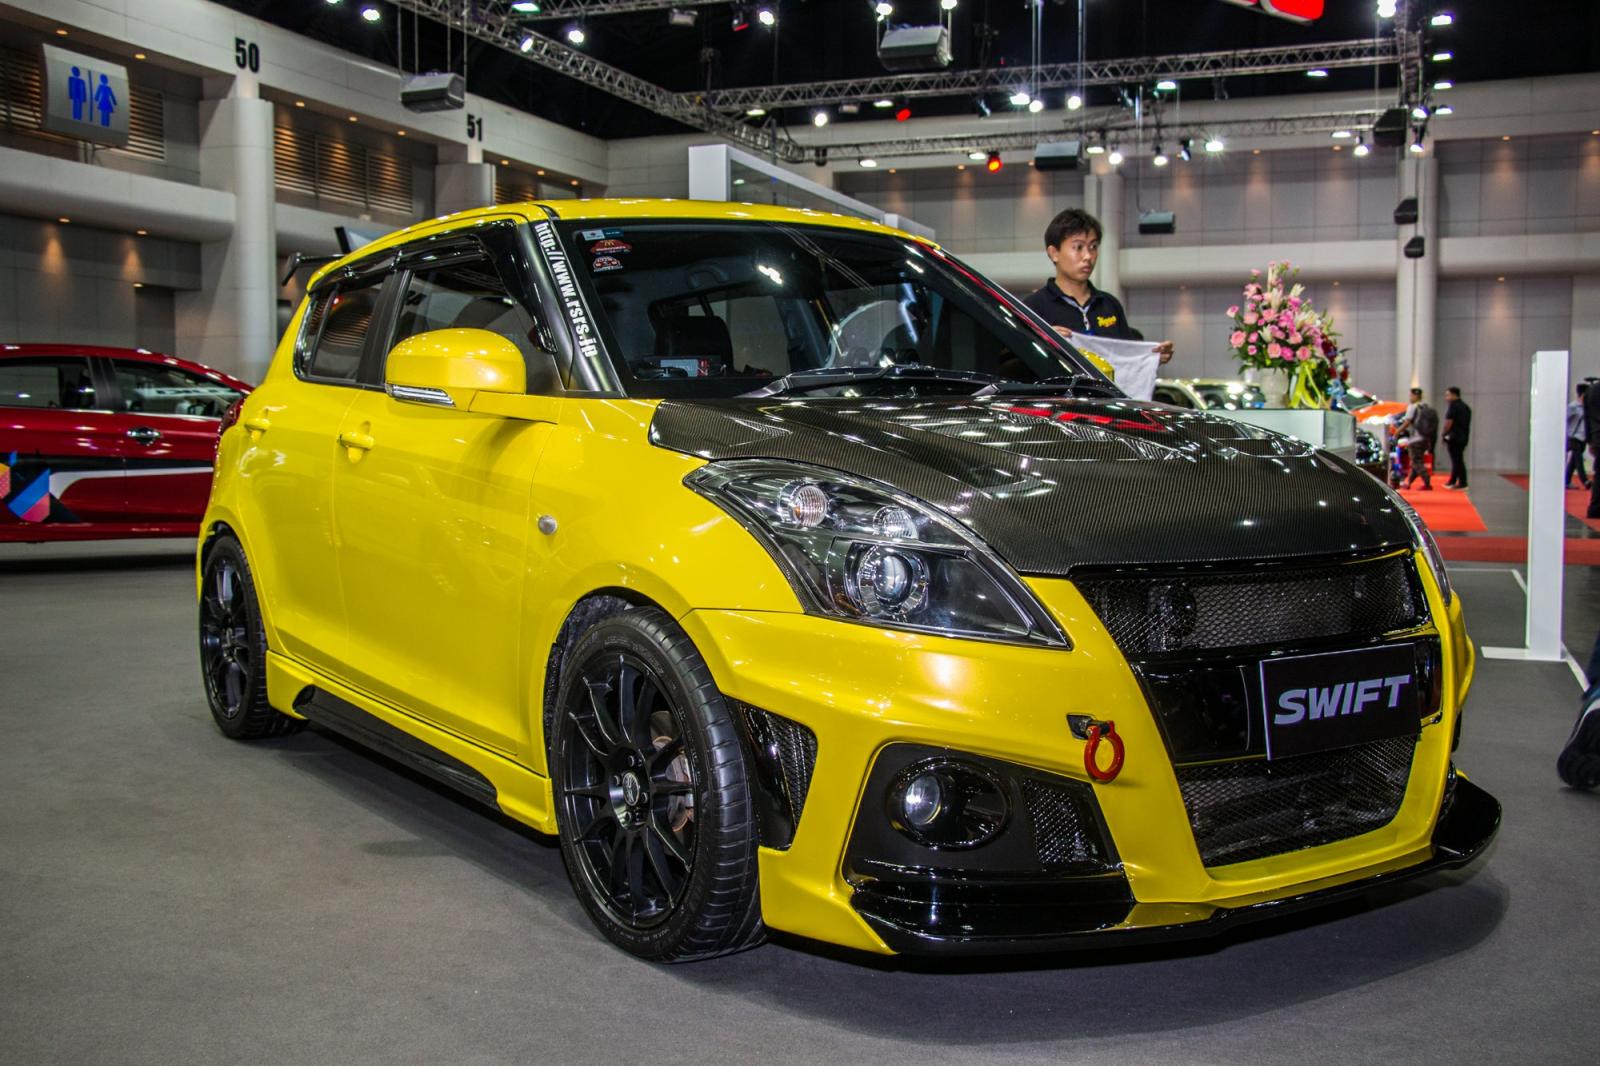 Suzuki Swift Modified - Which Part Should You Upgrade For Better Version